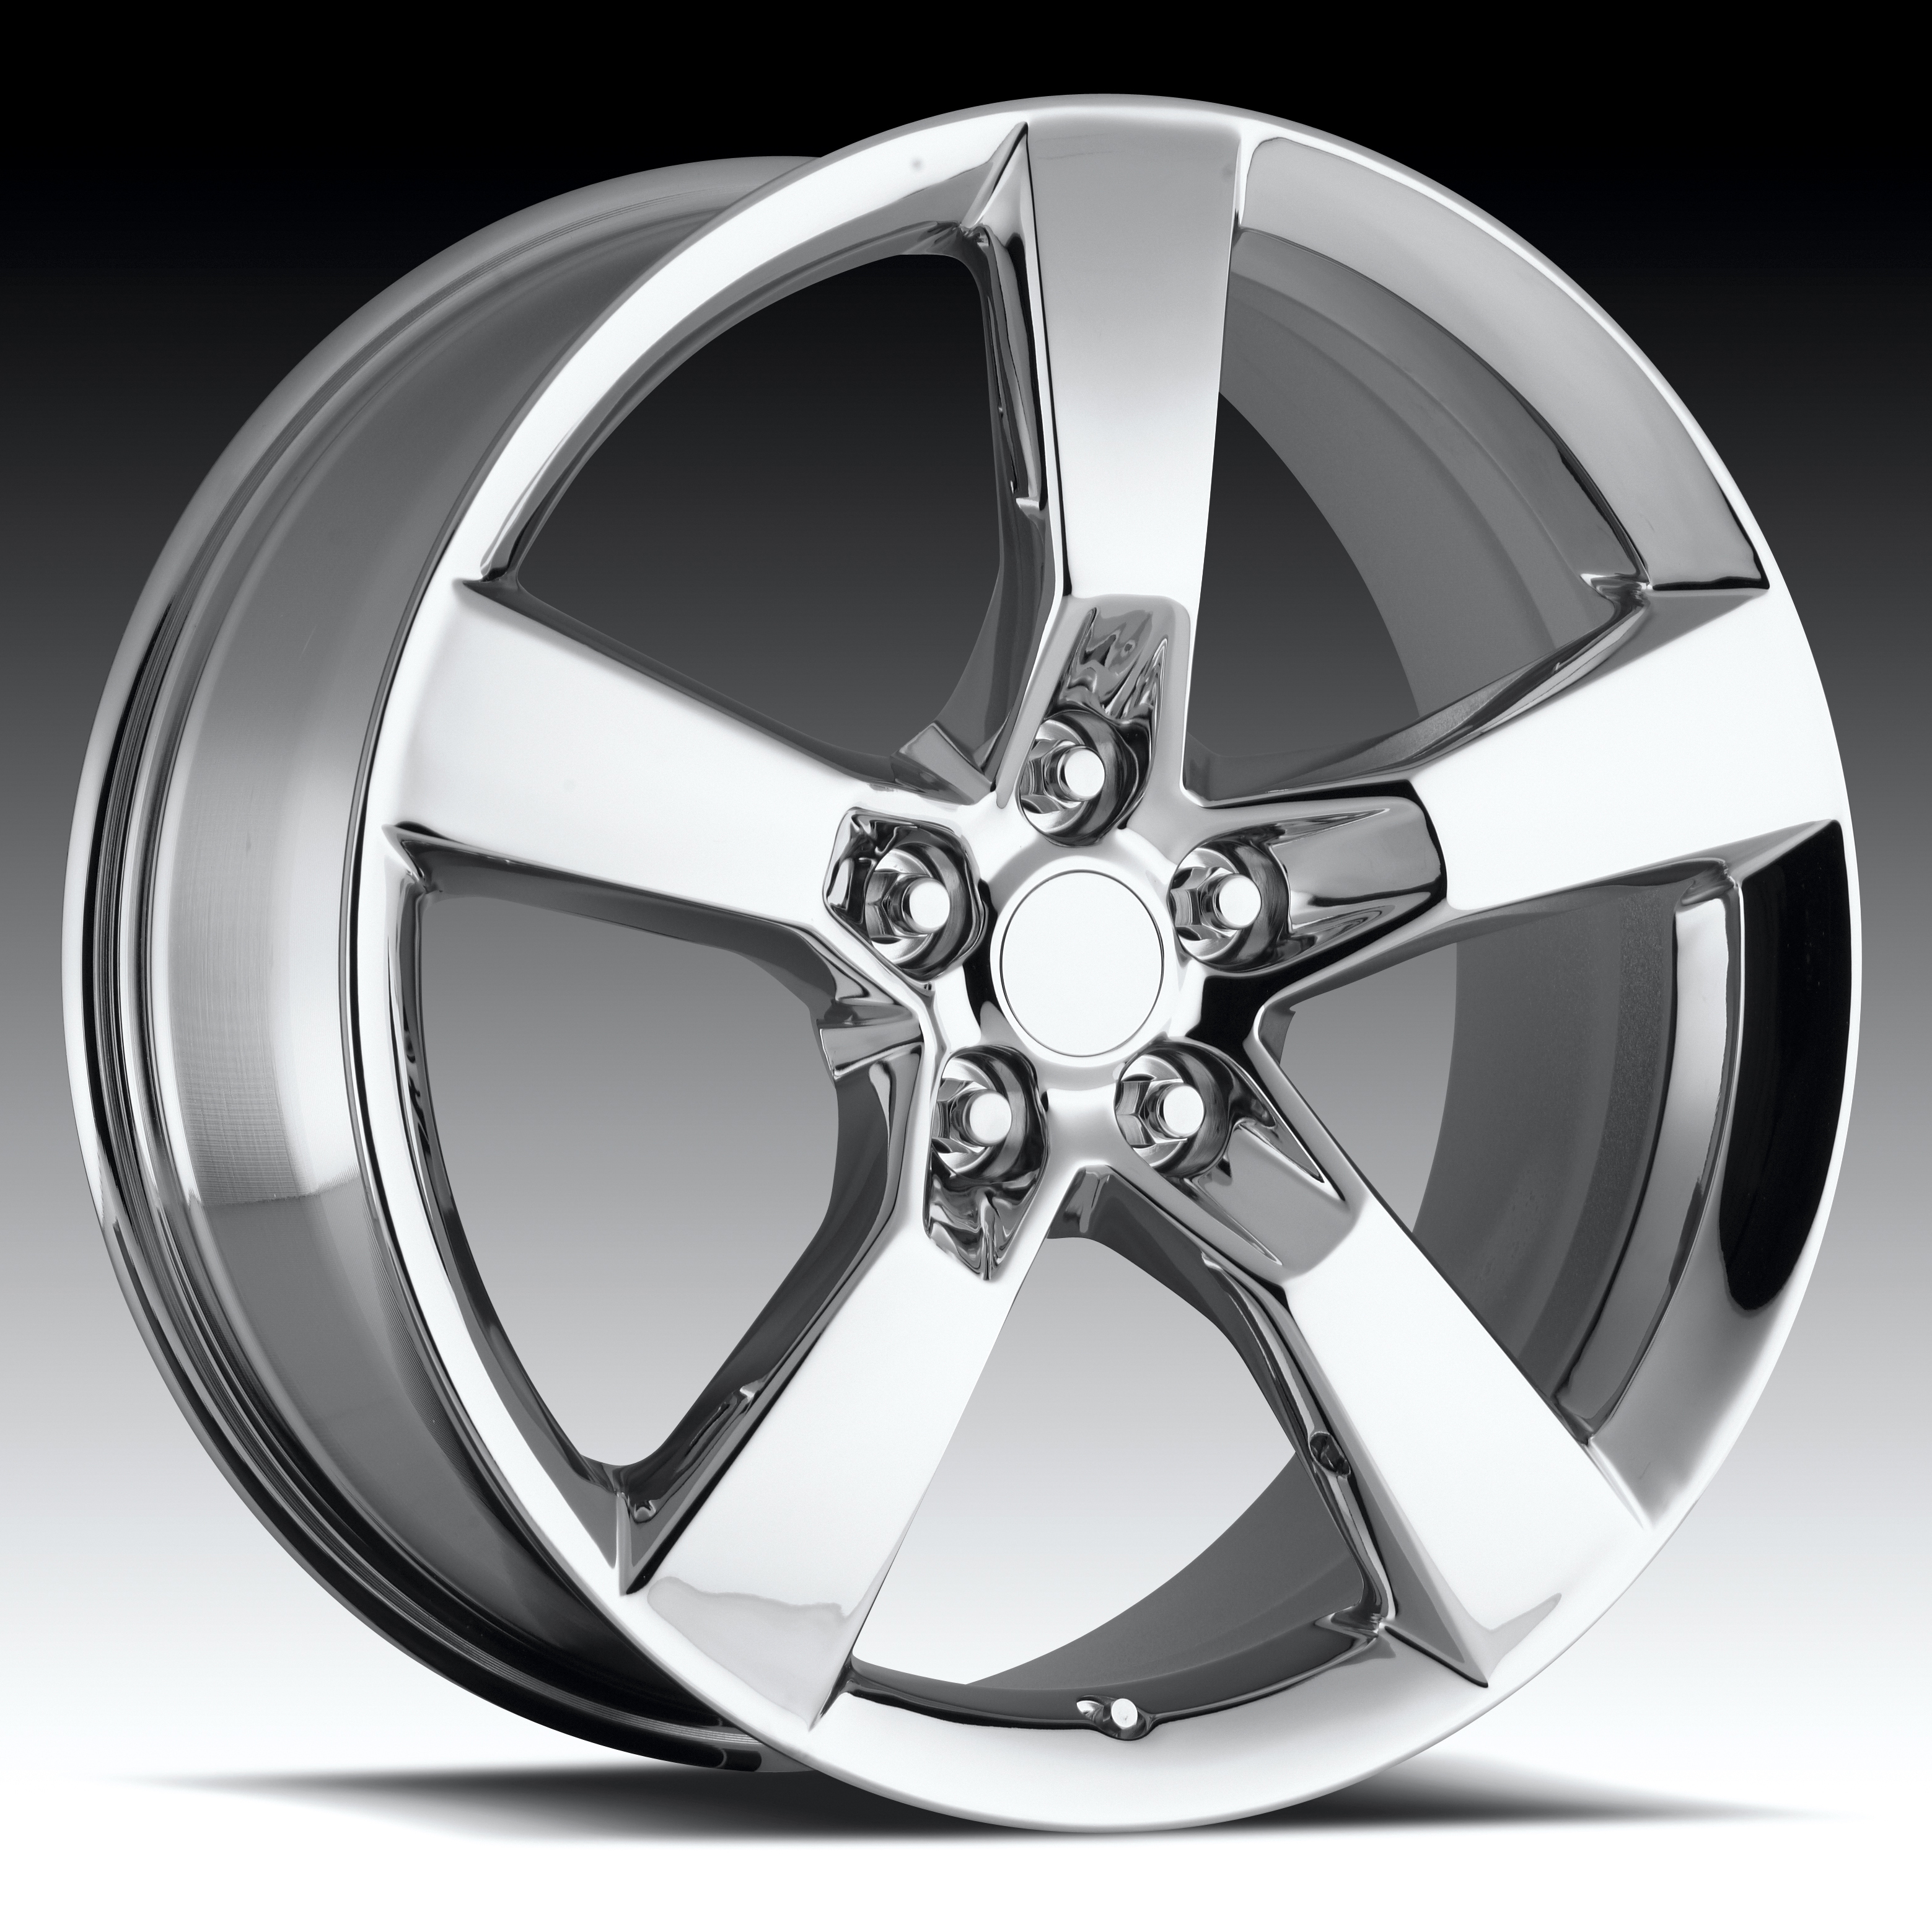 2010-2015 Camaro 20" Wheel Package : Reproduction Chrome